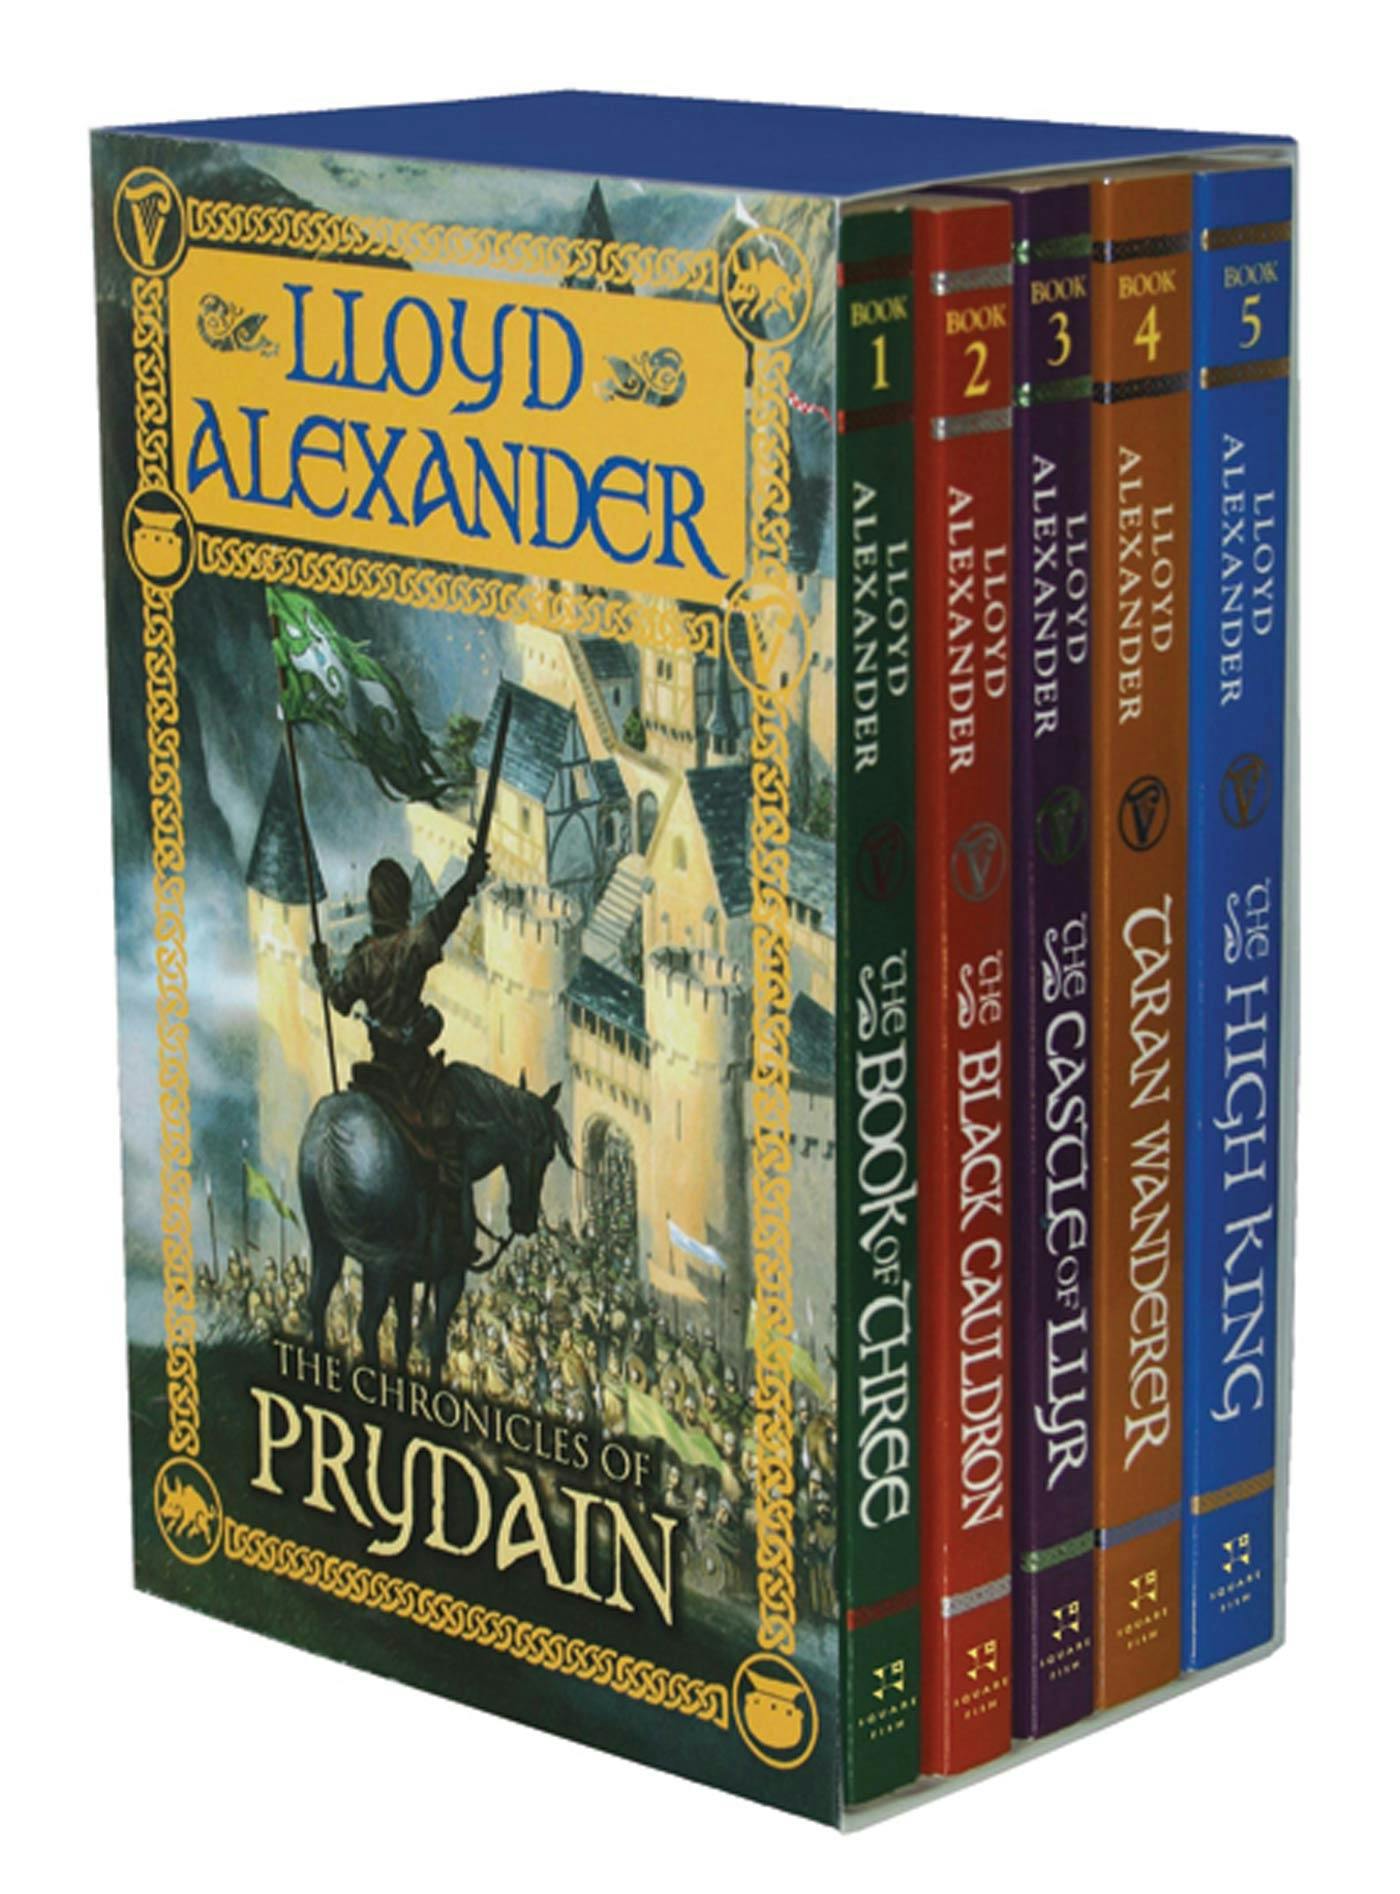 the chronicles of prydain box set